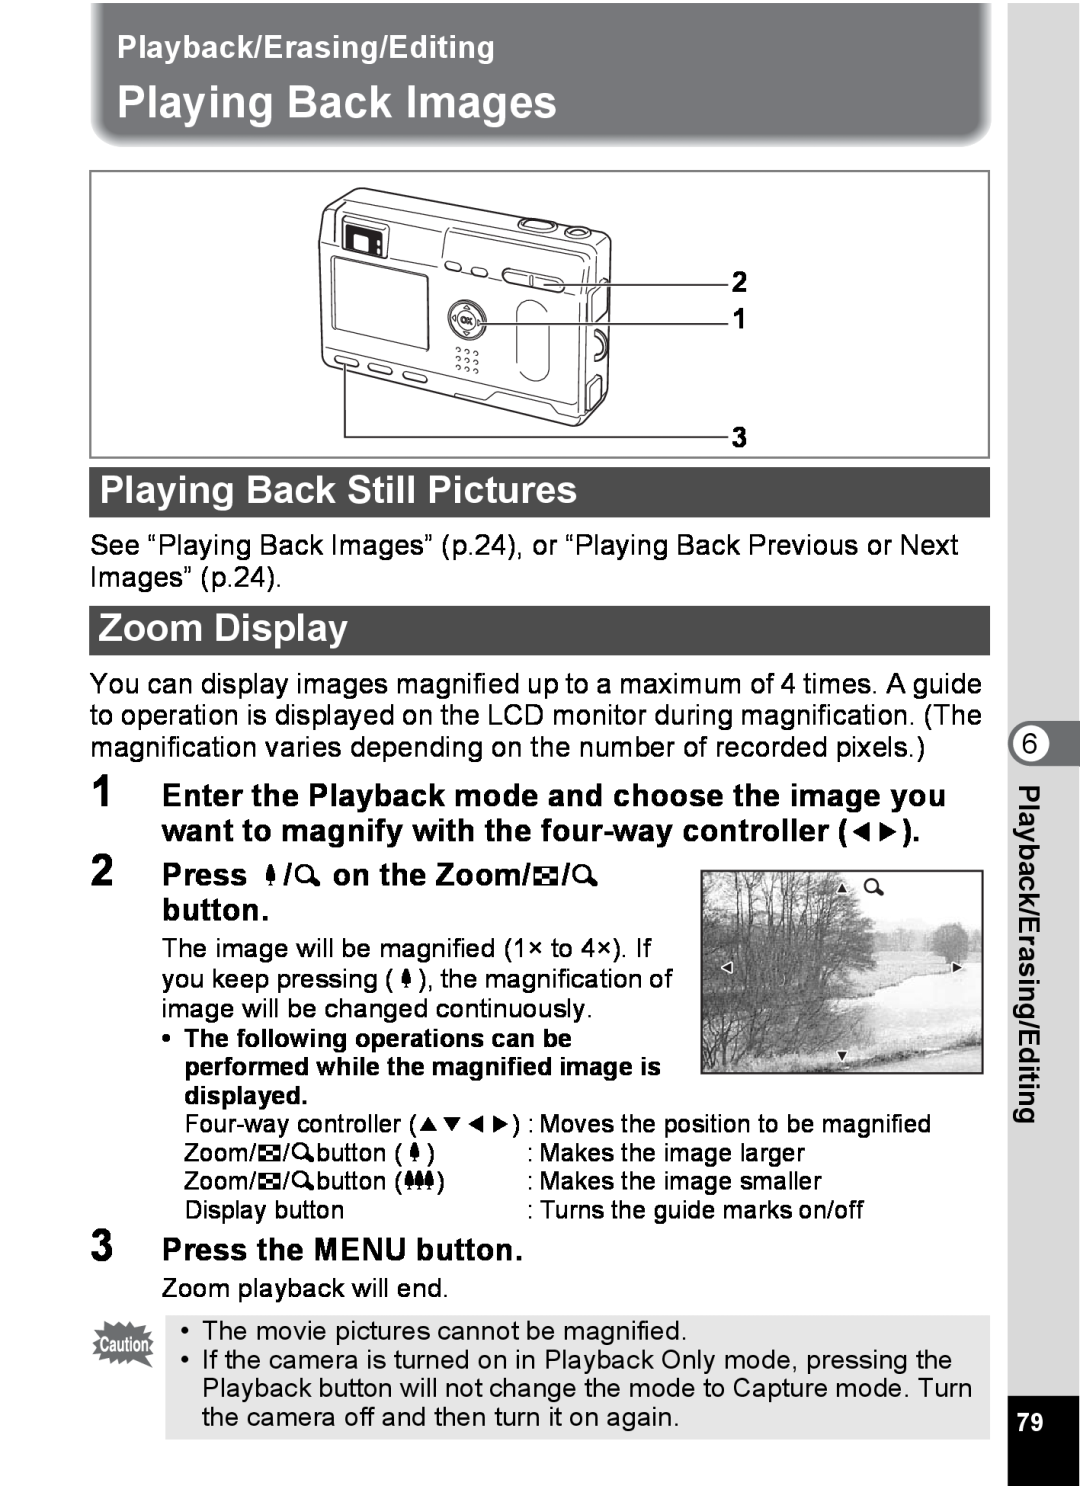 Pentax S4 Playing Back Images, Playing Back Still Pictures, Zoom Display, Playback/Erasing/Editing, Press the MENU button 